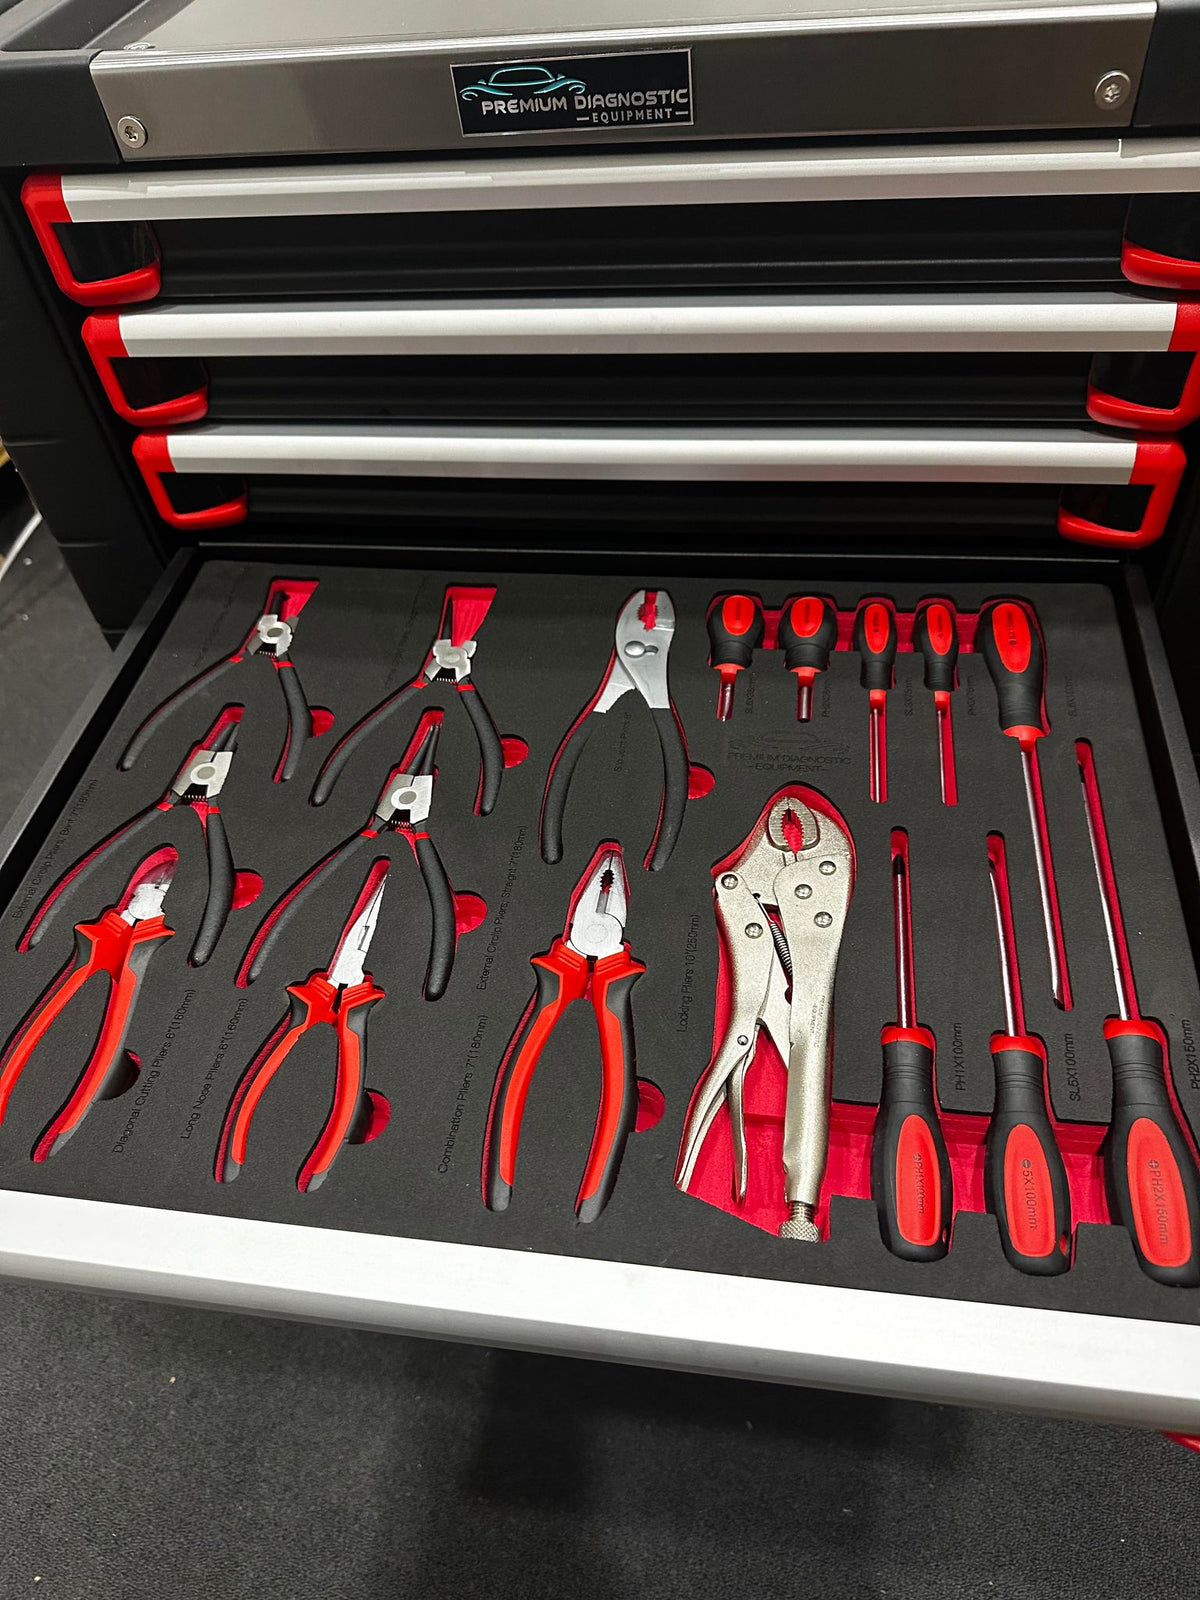 screwdriver plier set in eva foam tray cut out for tool box